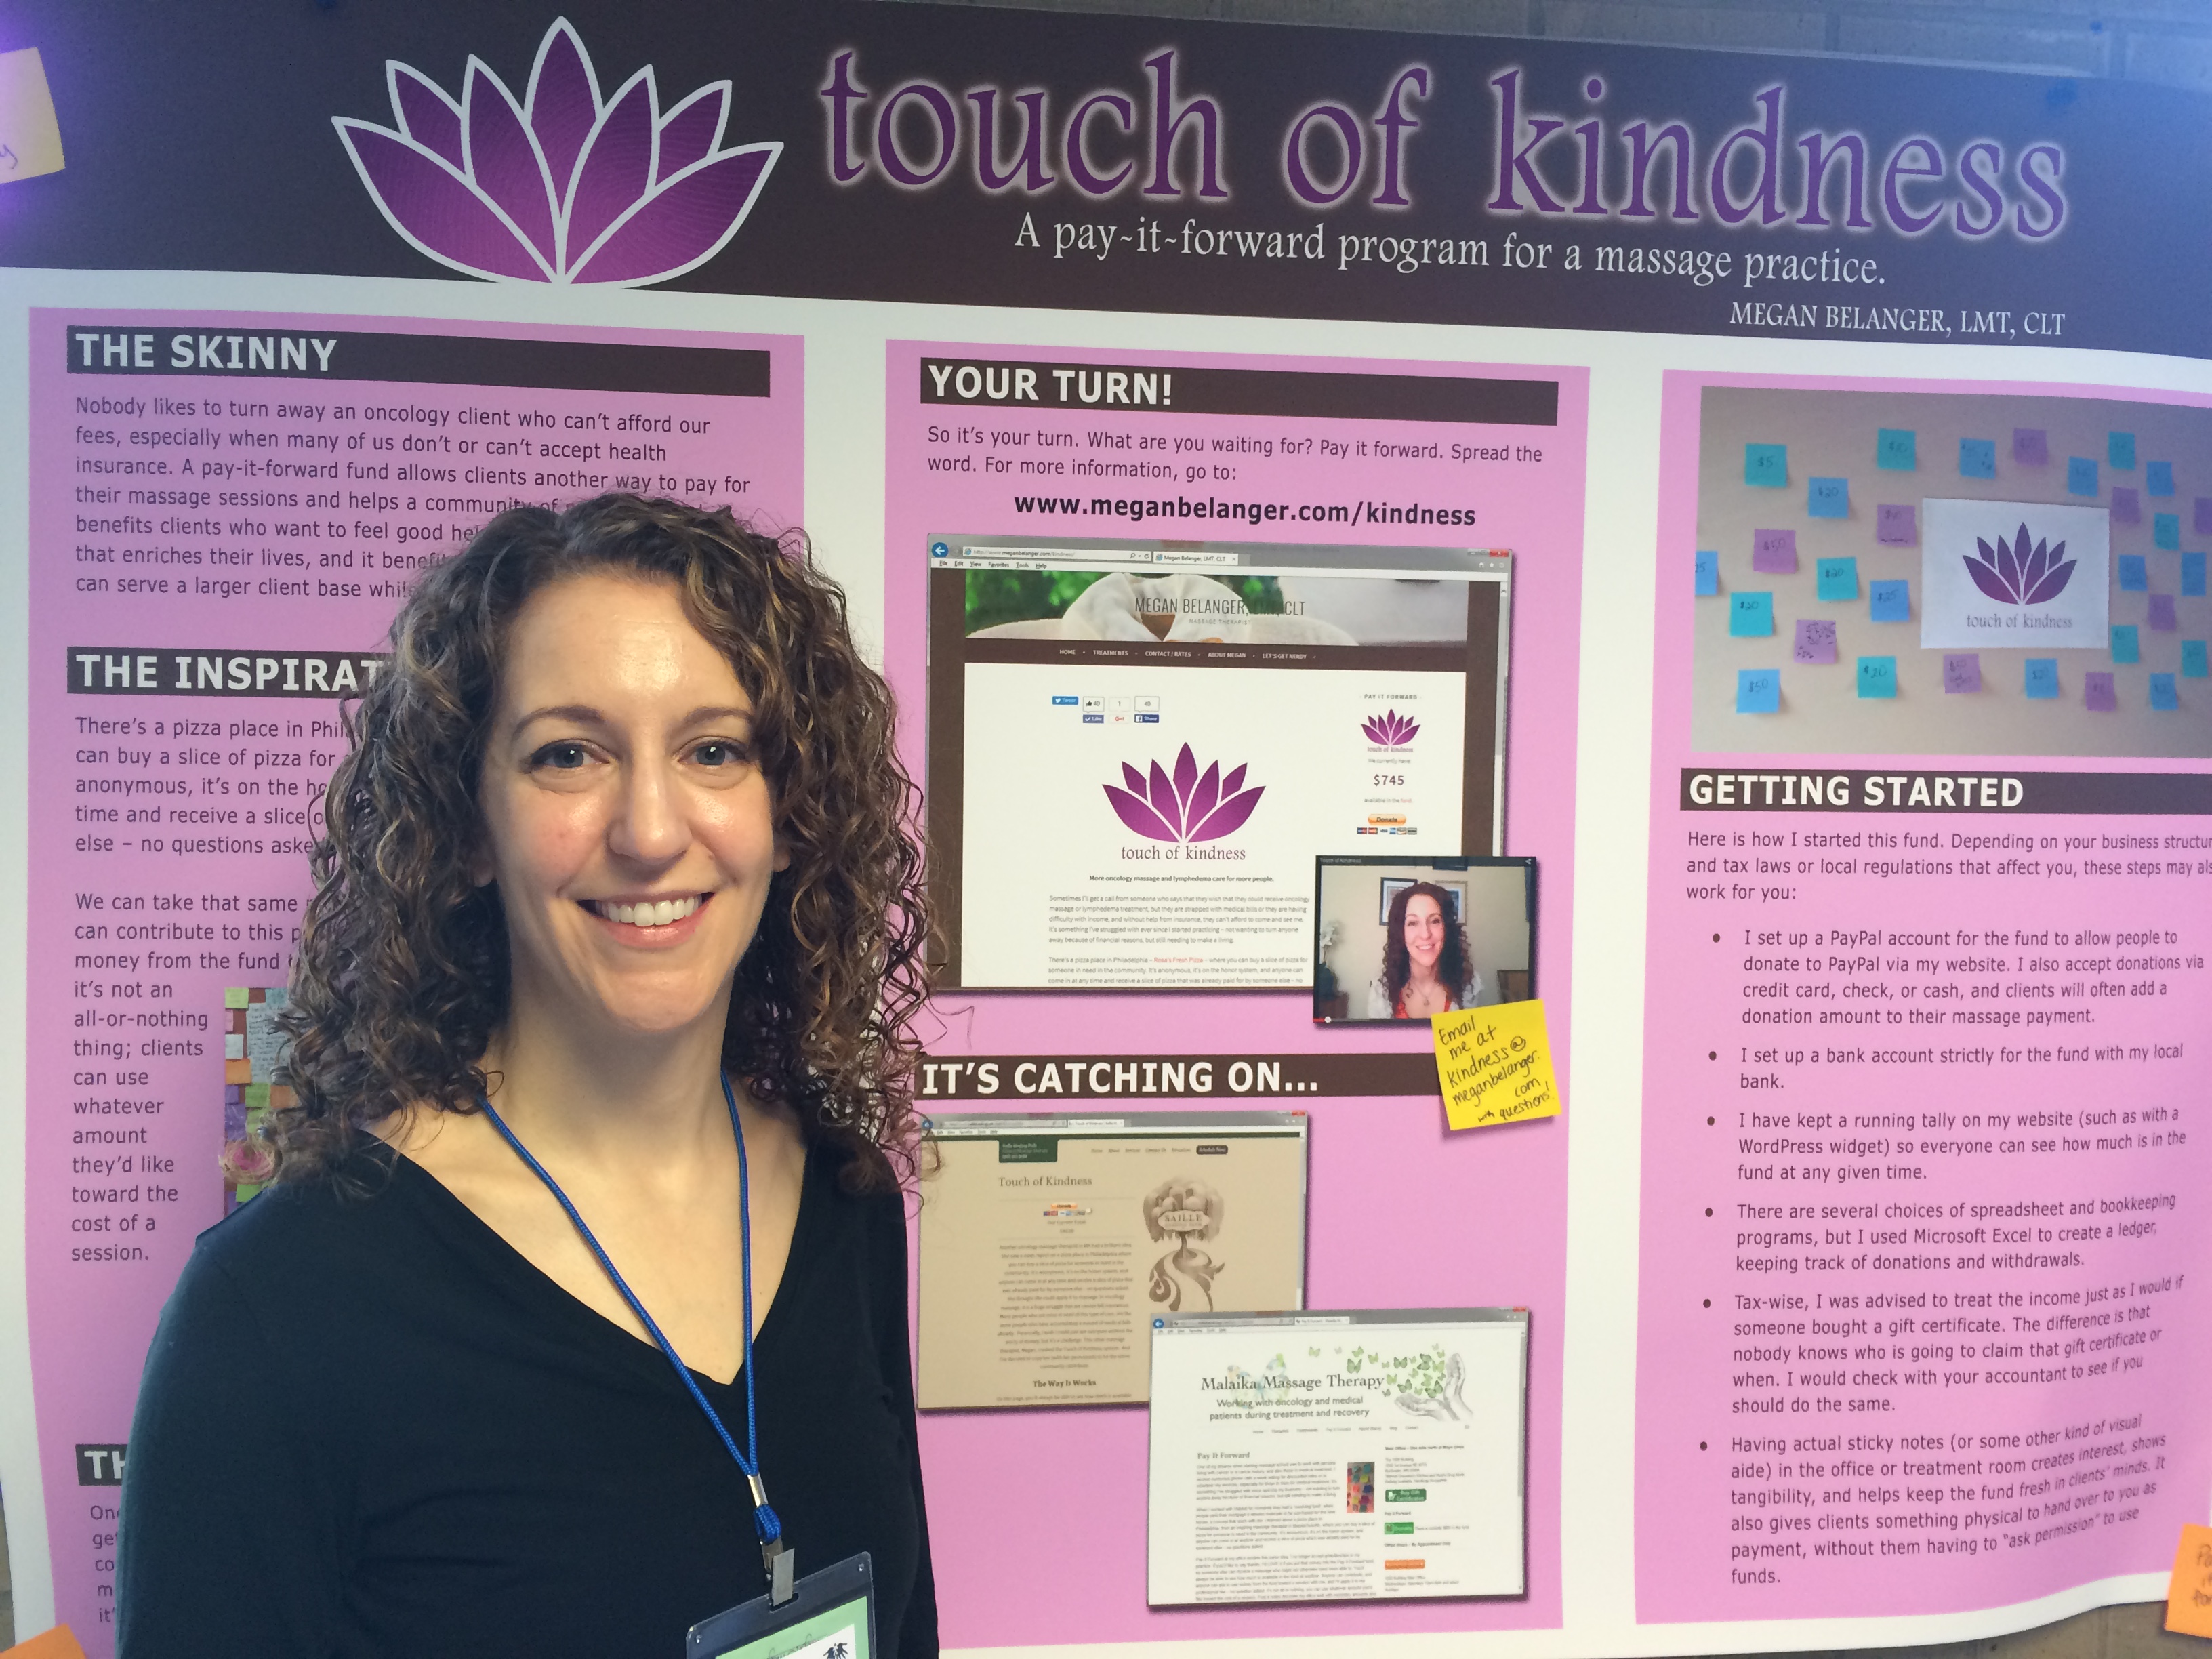 Touch of Kindness was proud to present at poster at the 2016 Society for Oncology Massage summit in Minneapolis.